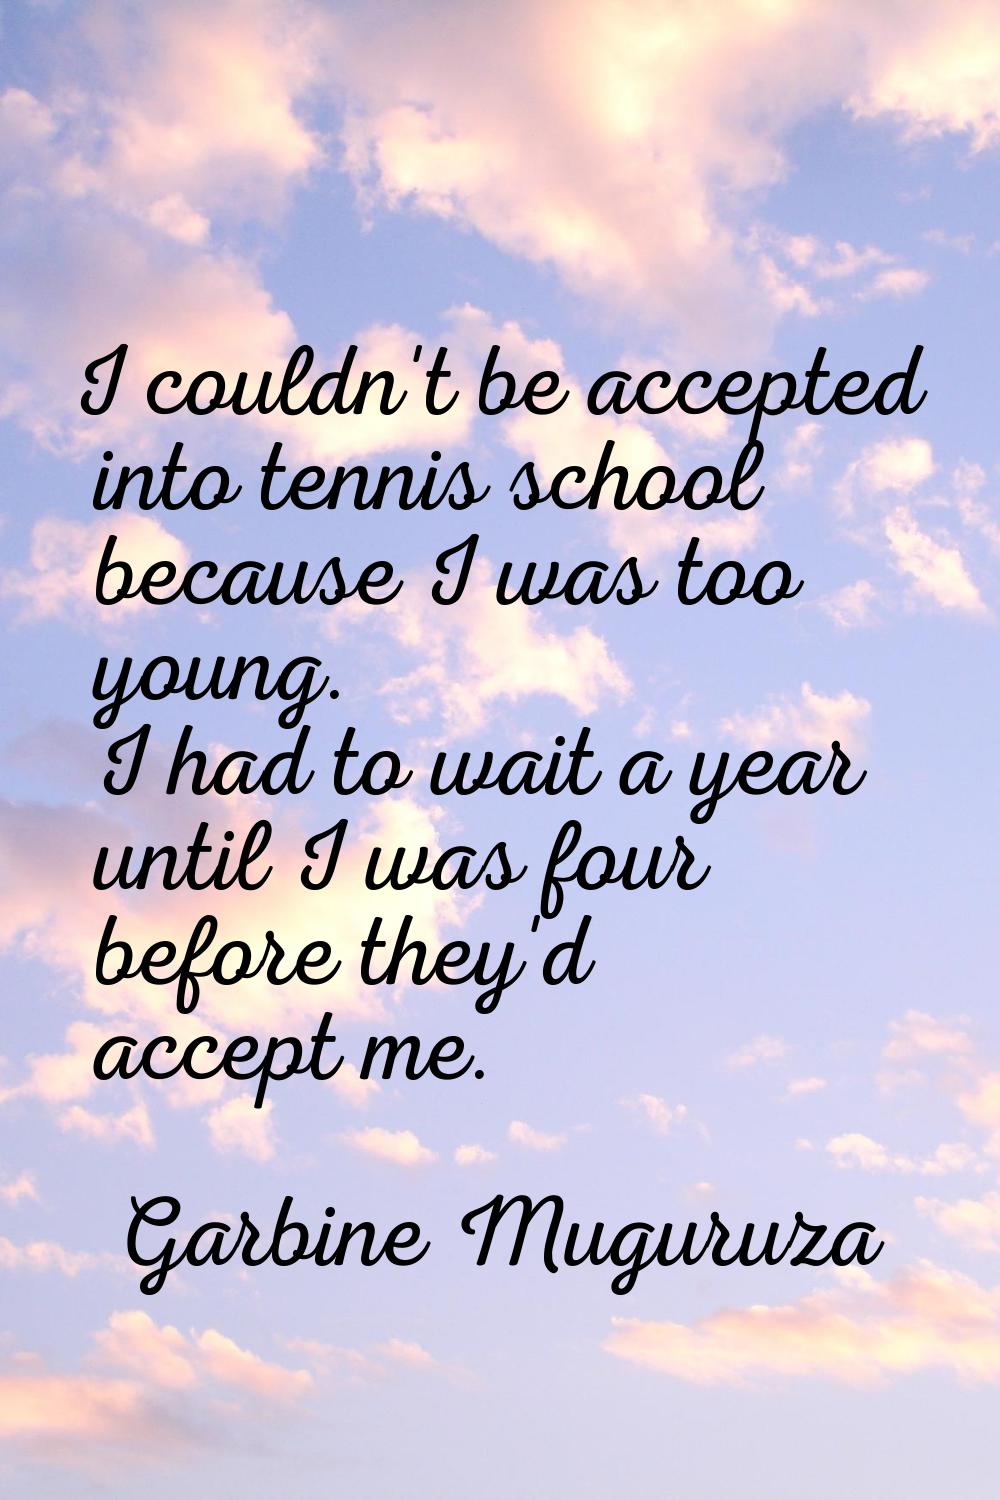 I couldn't be accepted into tennis school because I was too young. I had to wait a year until I was